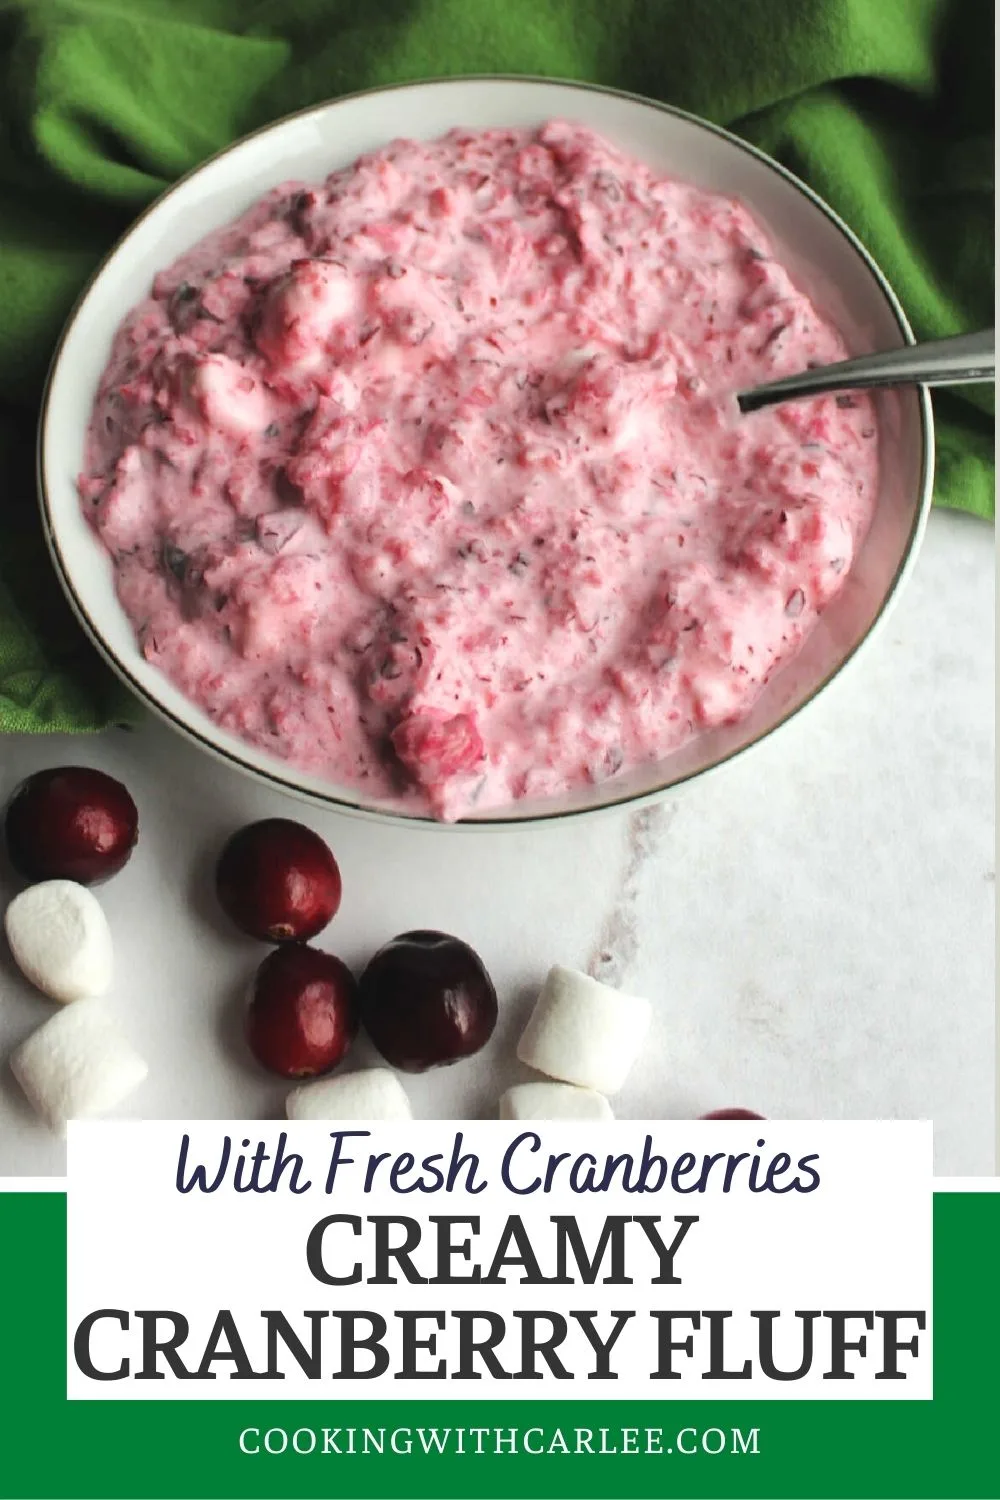 Make a delicious cranberry fluff from fresh cranberries as a fun side dish or simple dessert. It will be such a pretty addition to your holiday menu but is great for any day.